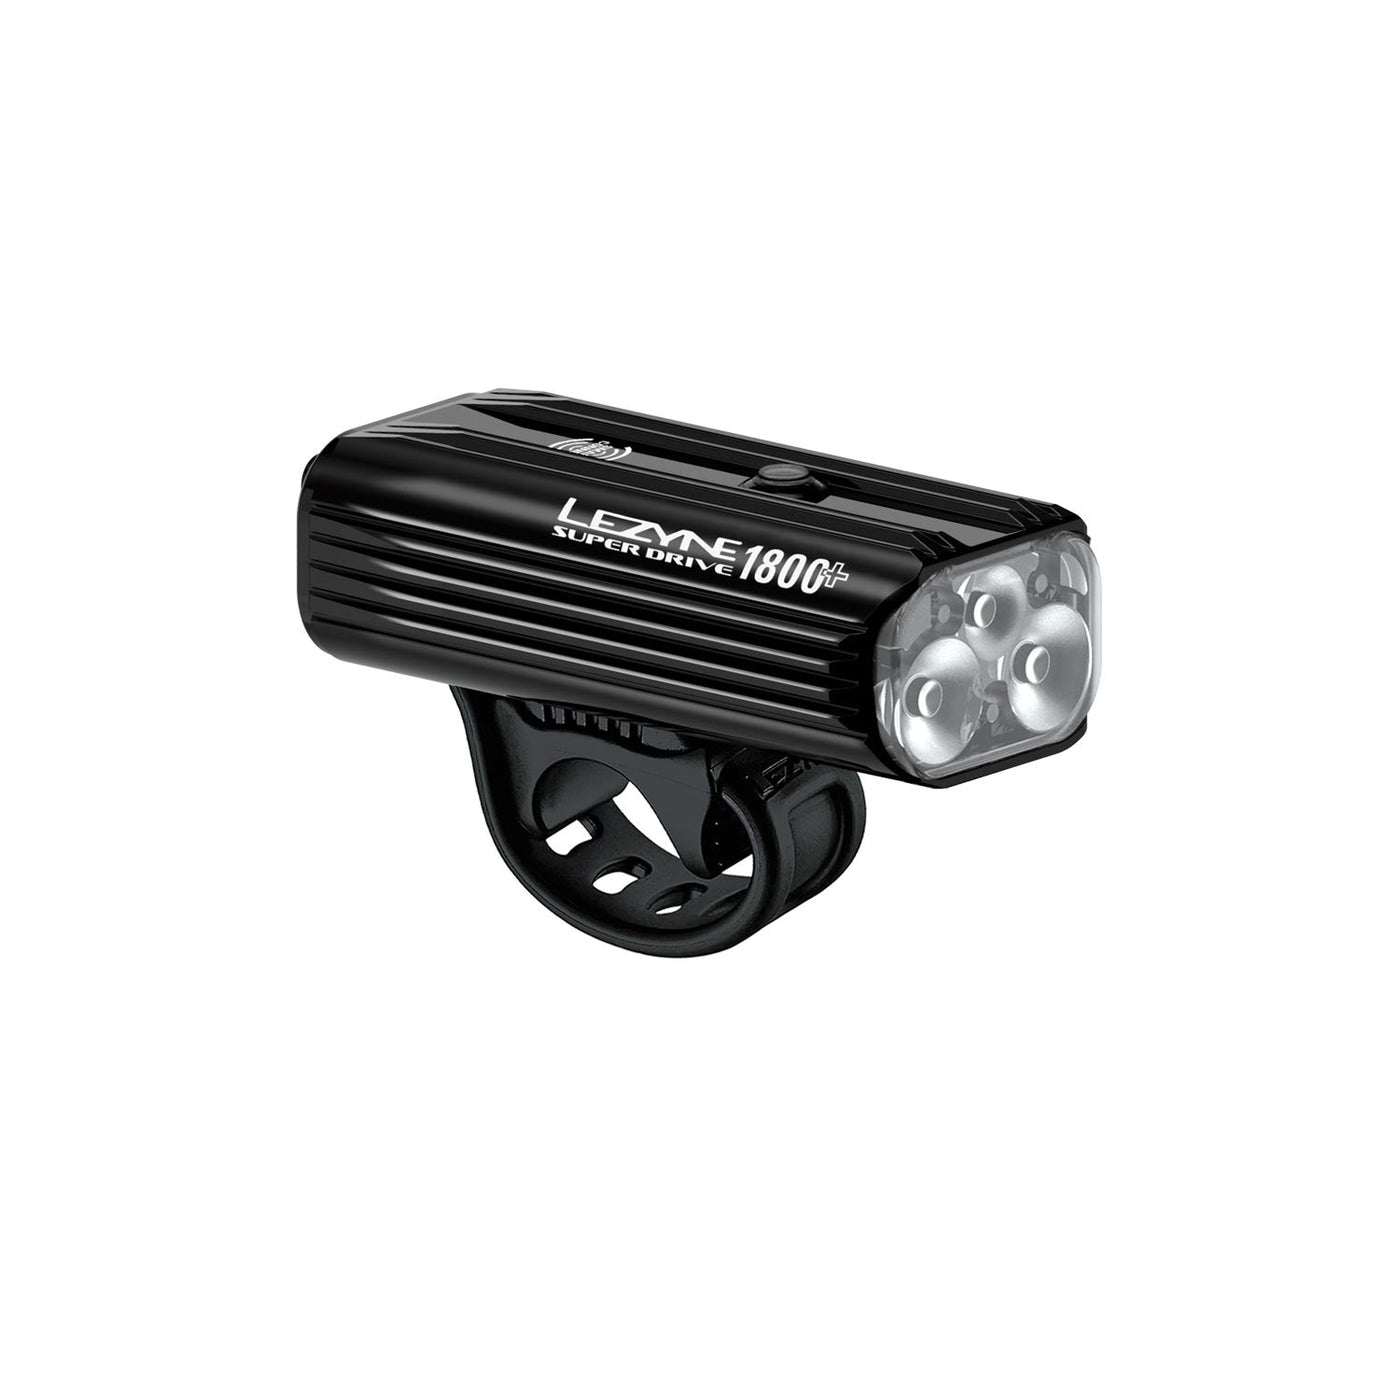 Lezyne Super Drive 1800+ Smart Front Cycle Light